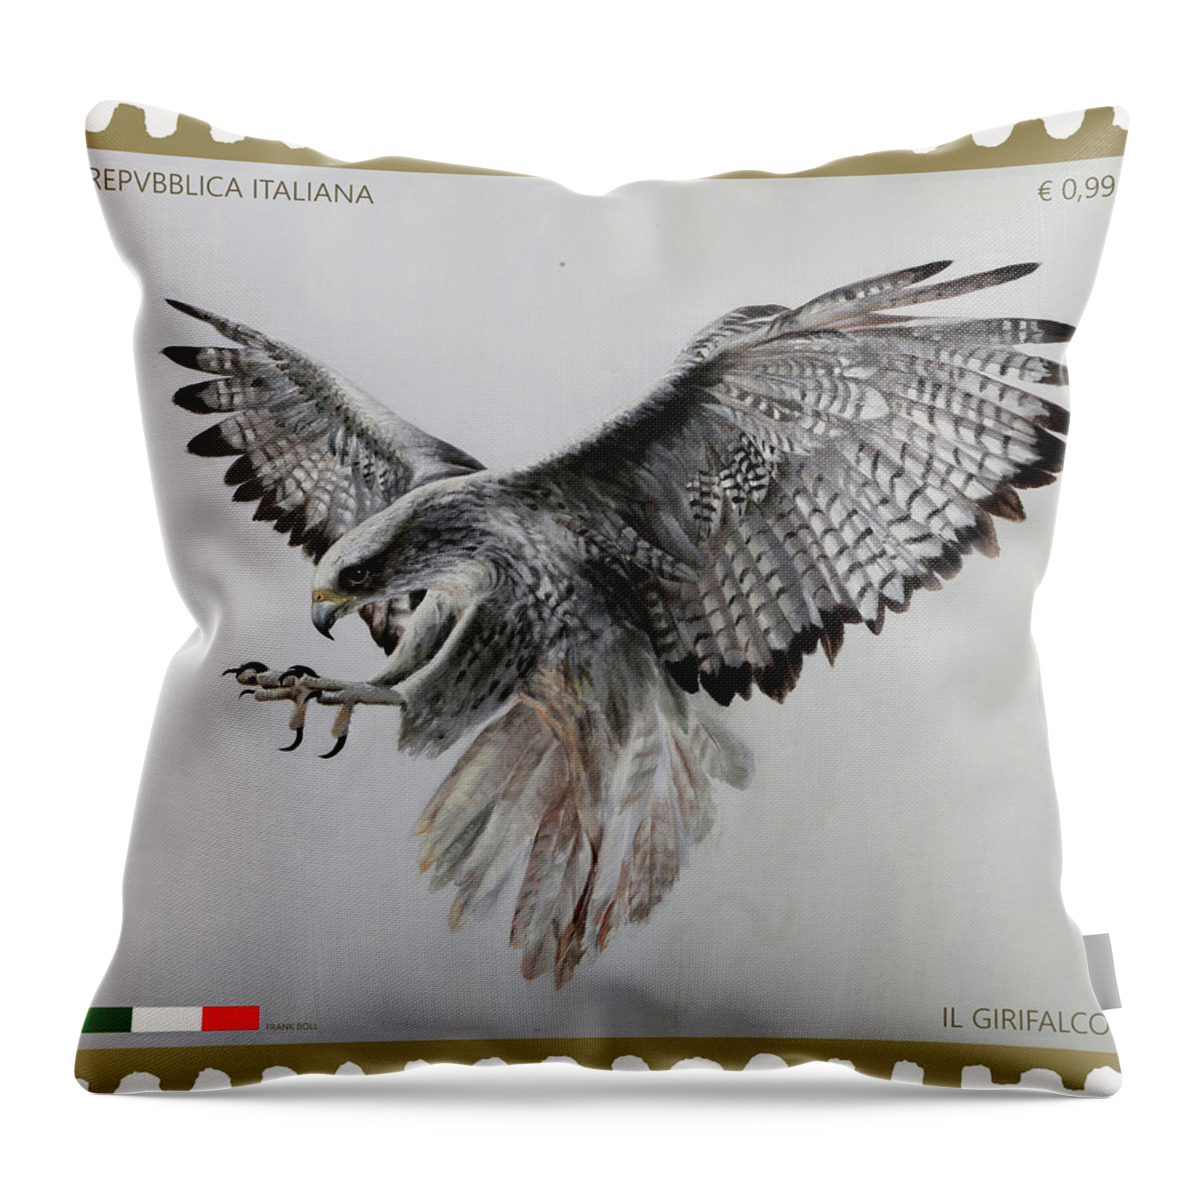 Girifalco Stamp Throw Pillow featuring the painting Girifalcobollo by Guido Borelli